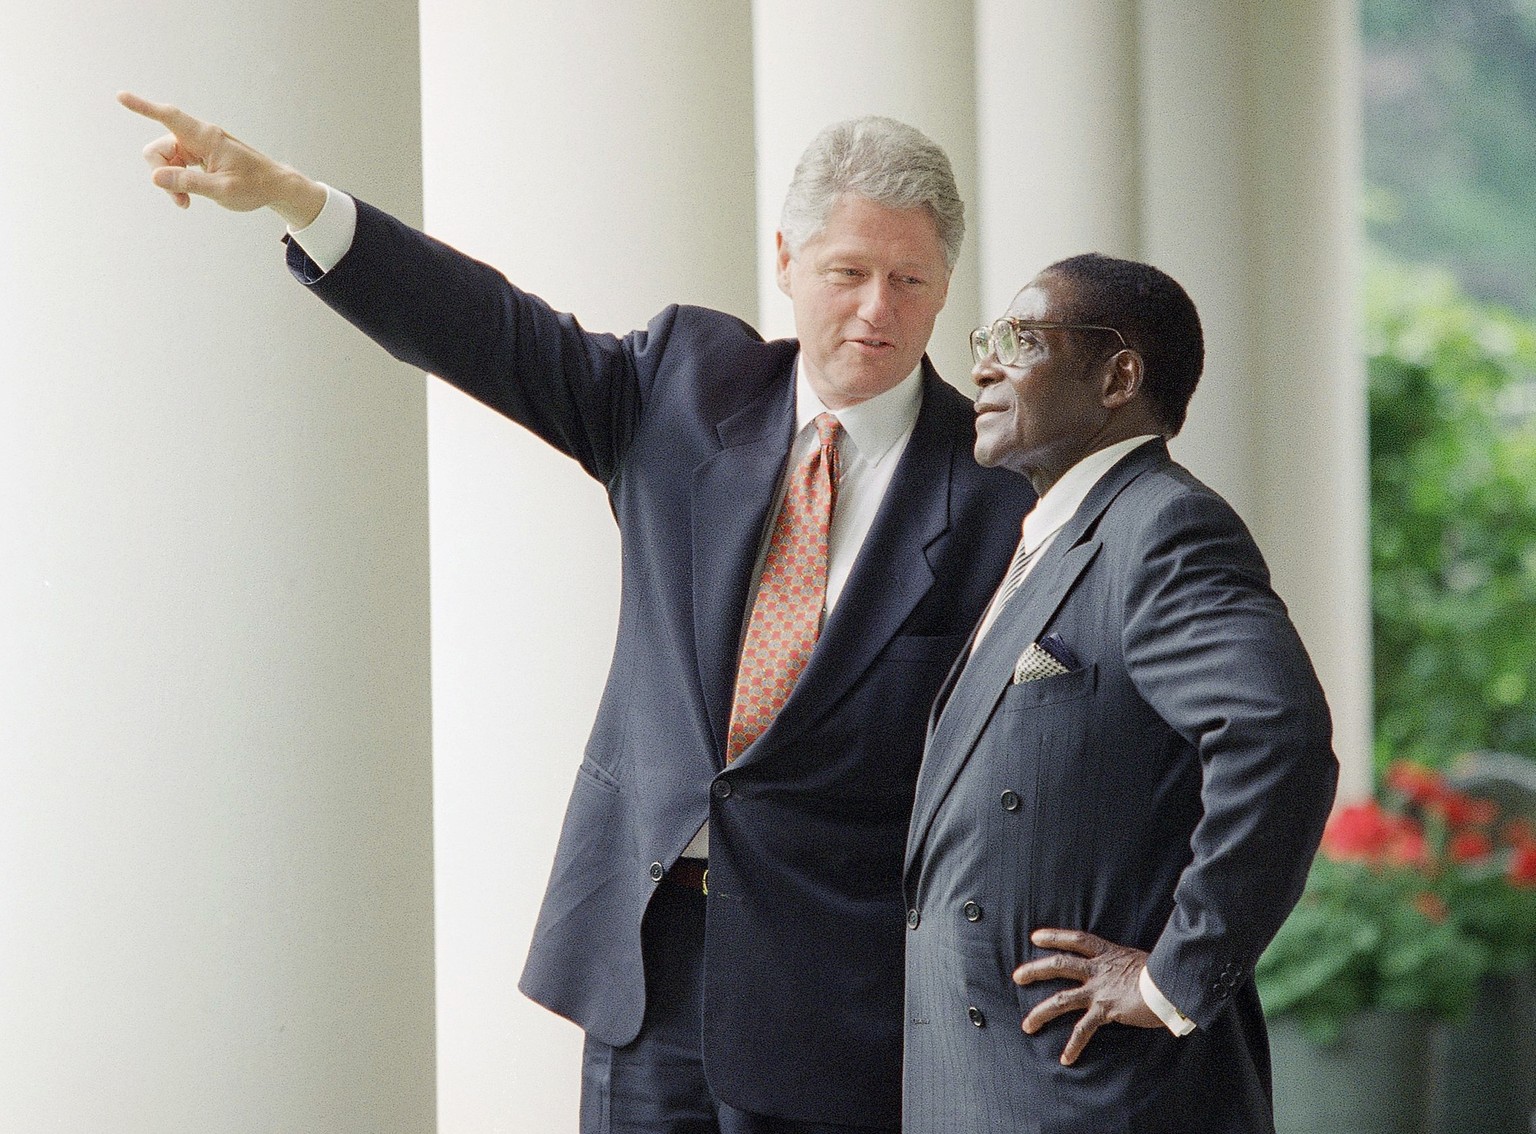 FILE - In this May 18, 1995 file photo President Bill Clinton gestures while talking to Zimbabwe Prime Minister Robert Mugabe in the Colonnades of the White House, Washington after their Oval Office m ...